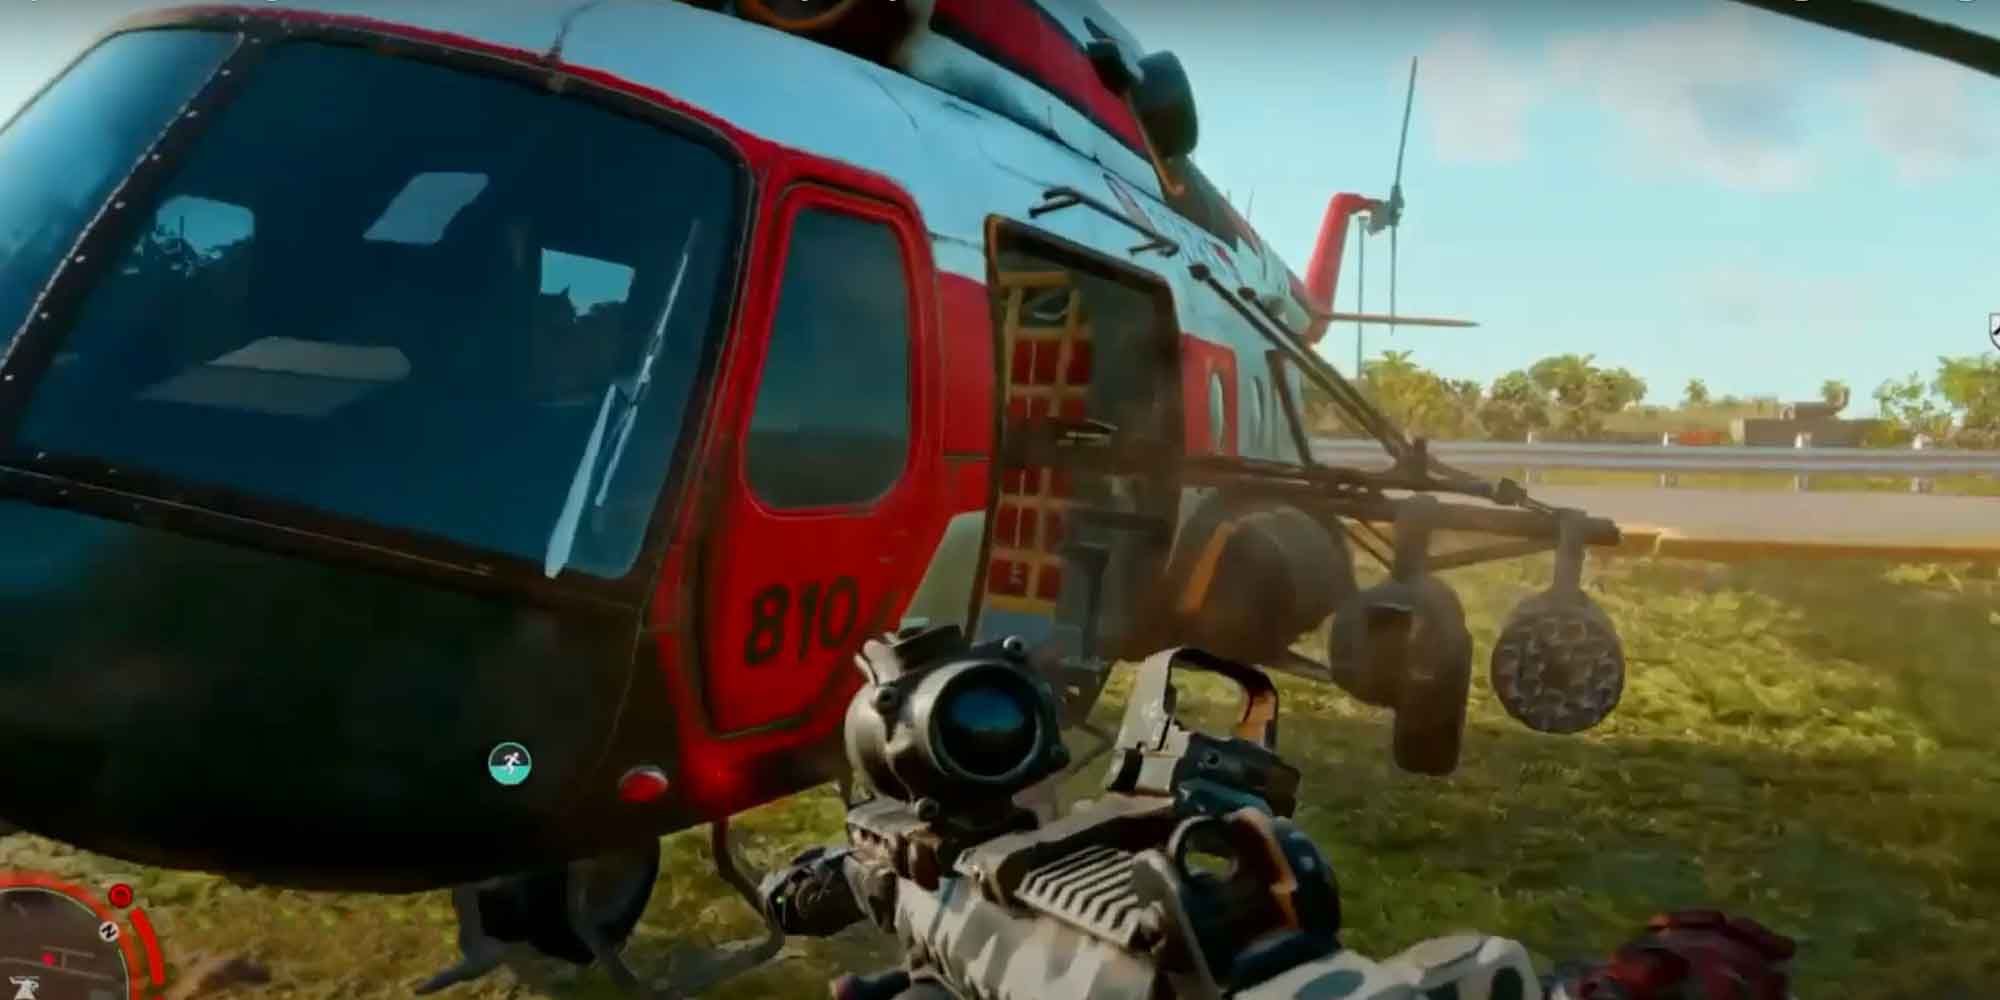 The 1968 Garin Vorona CT in Far Cry 6 comes with mounted machine guns and a bulletproof windshield